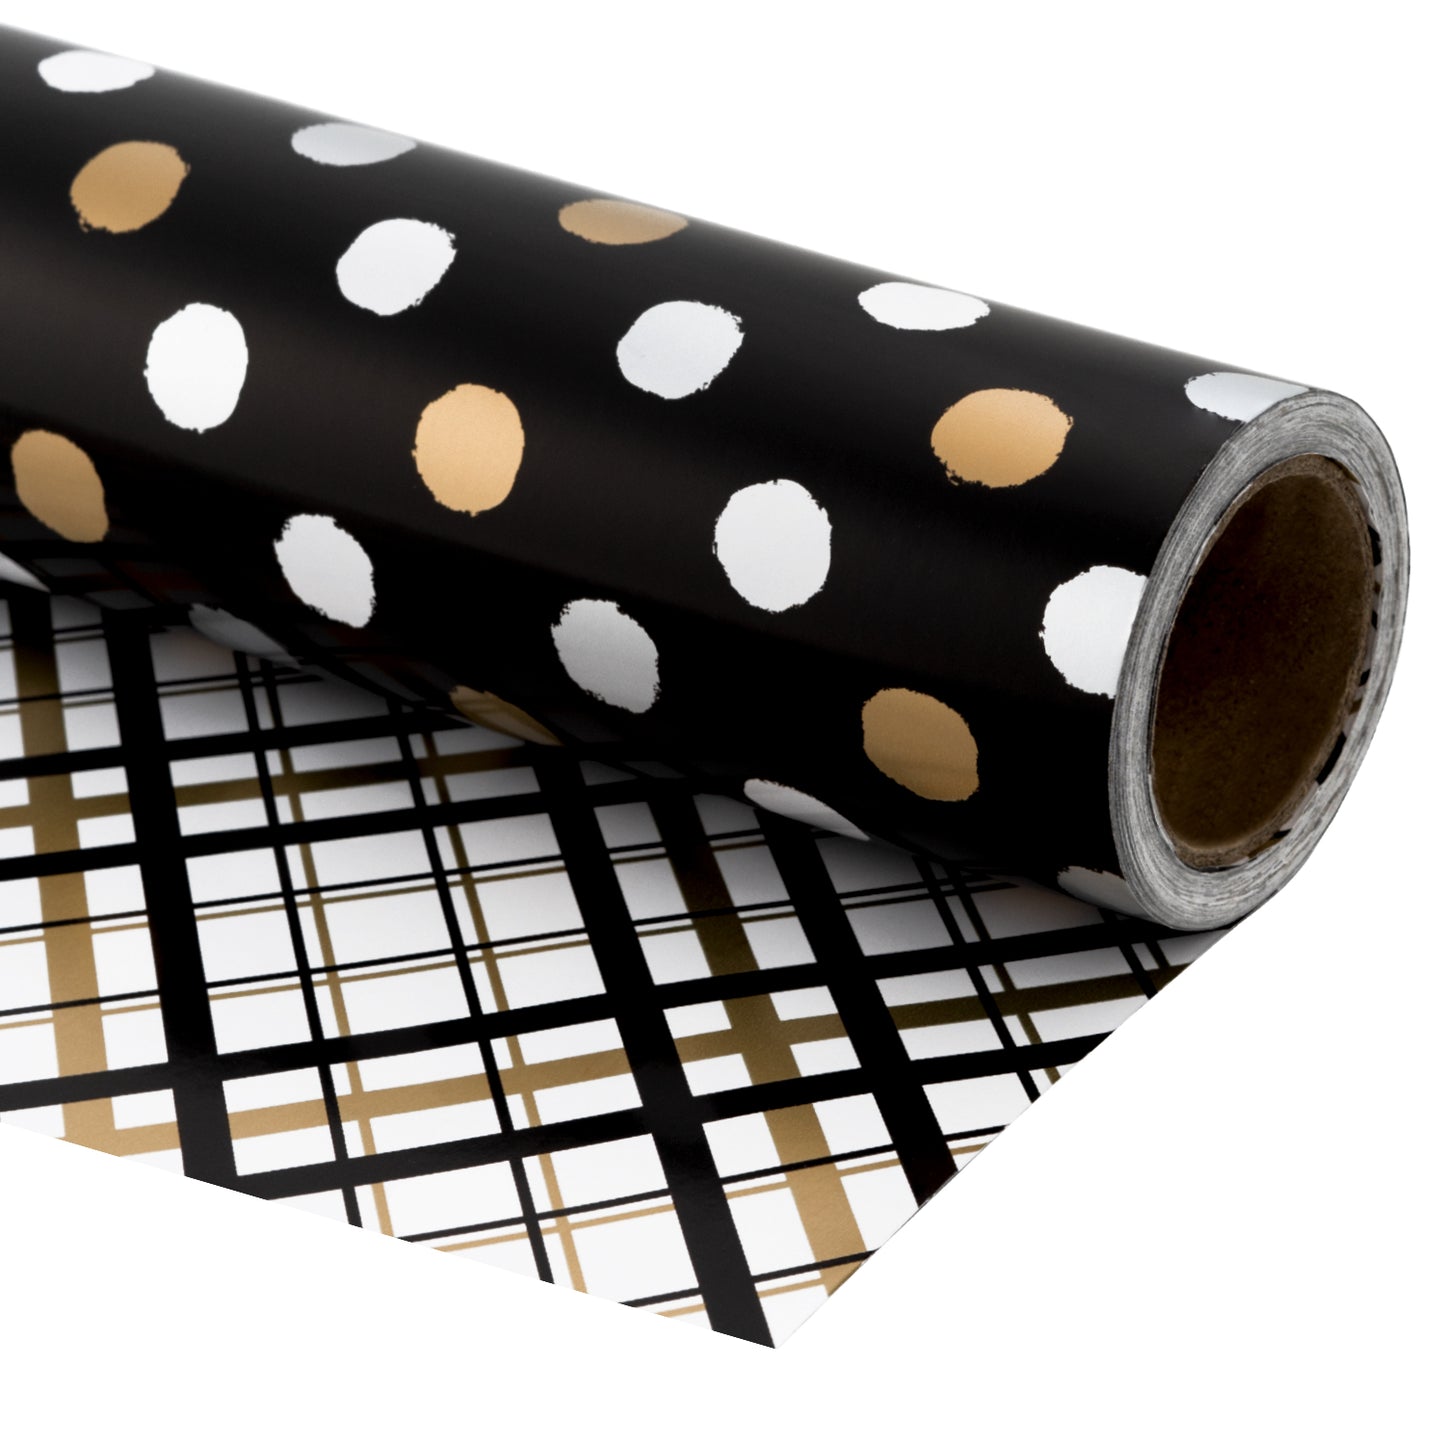 Black & Gold Polka Dot Wrapping Paper with Plaid Jumbo Roll Wholesale Wrapaholic